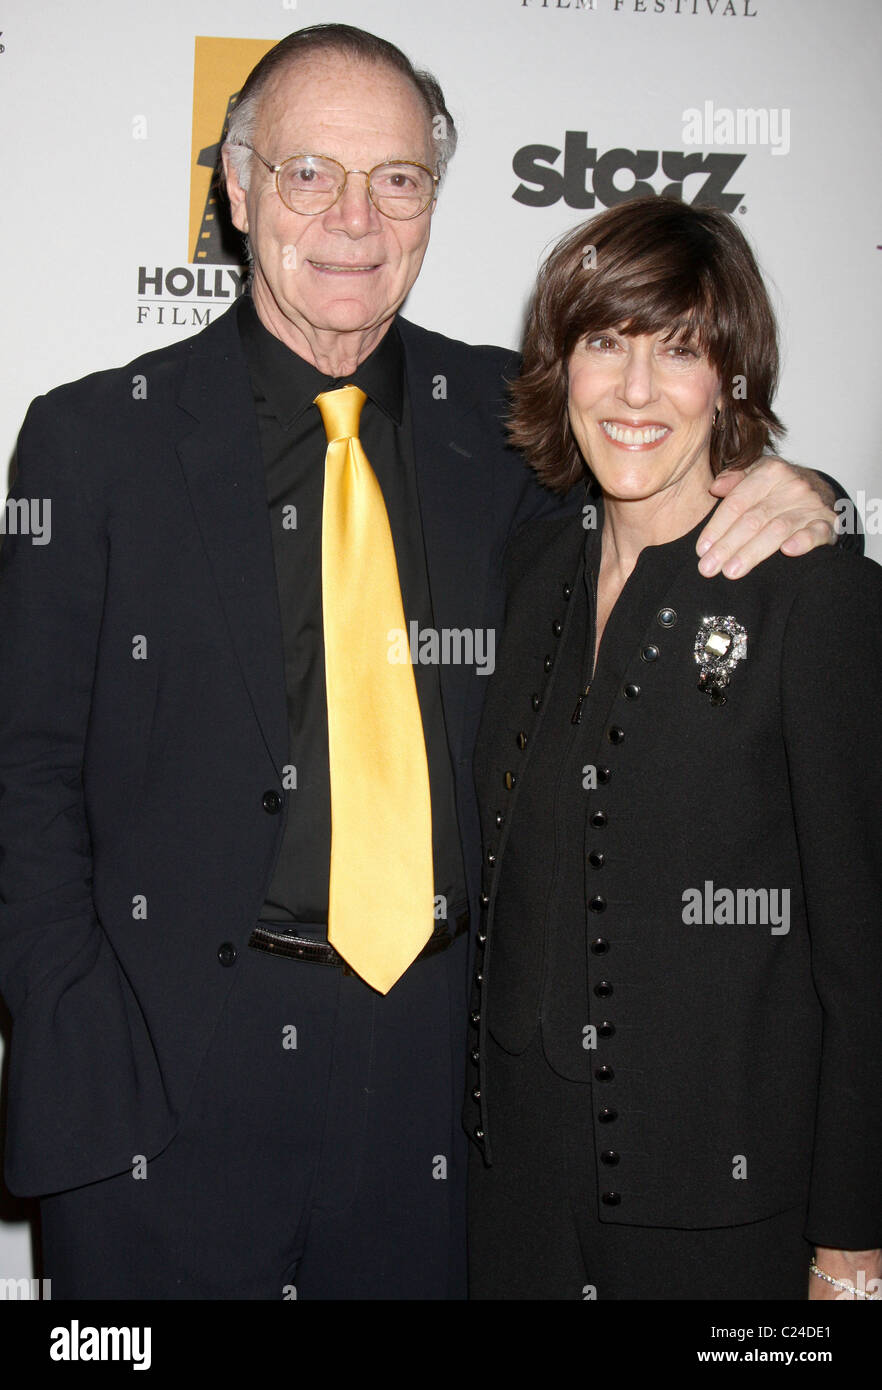 Nora Ephron, 13th Annual Hollywood Film Festival Awards Gala Ceremony held at the Beverly Hilton Hotel - Arrivals Beverly Stock Photo